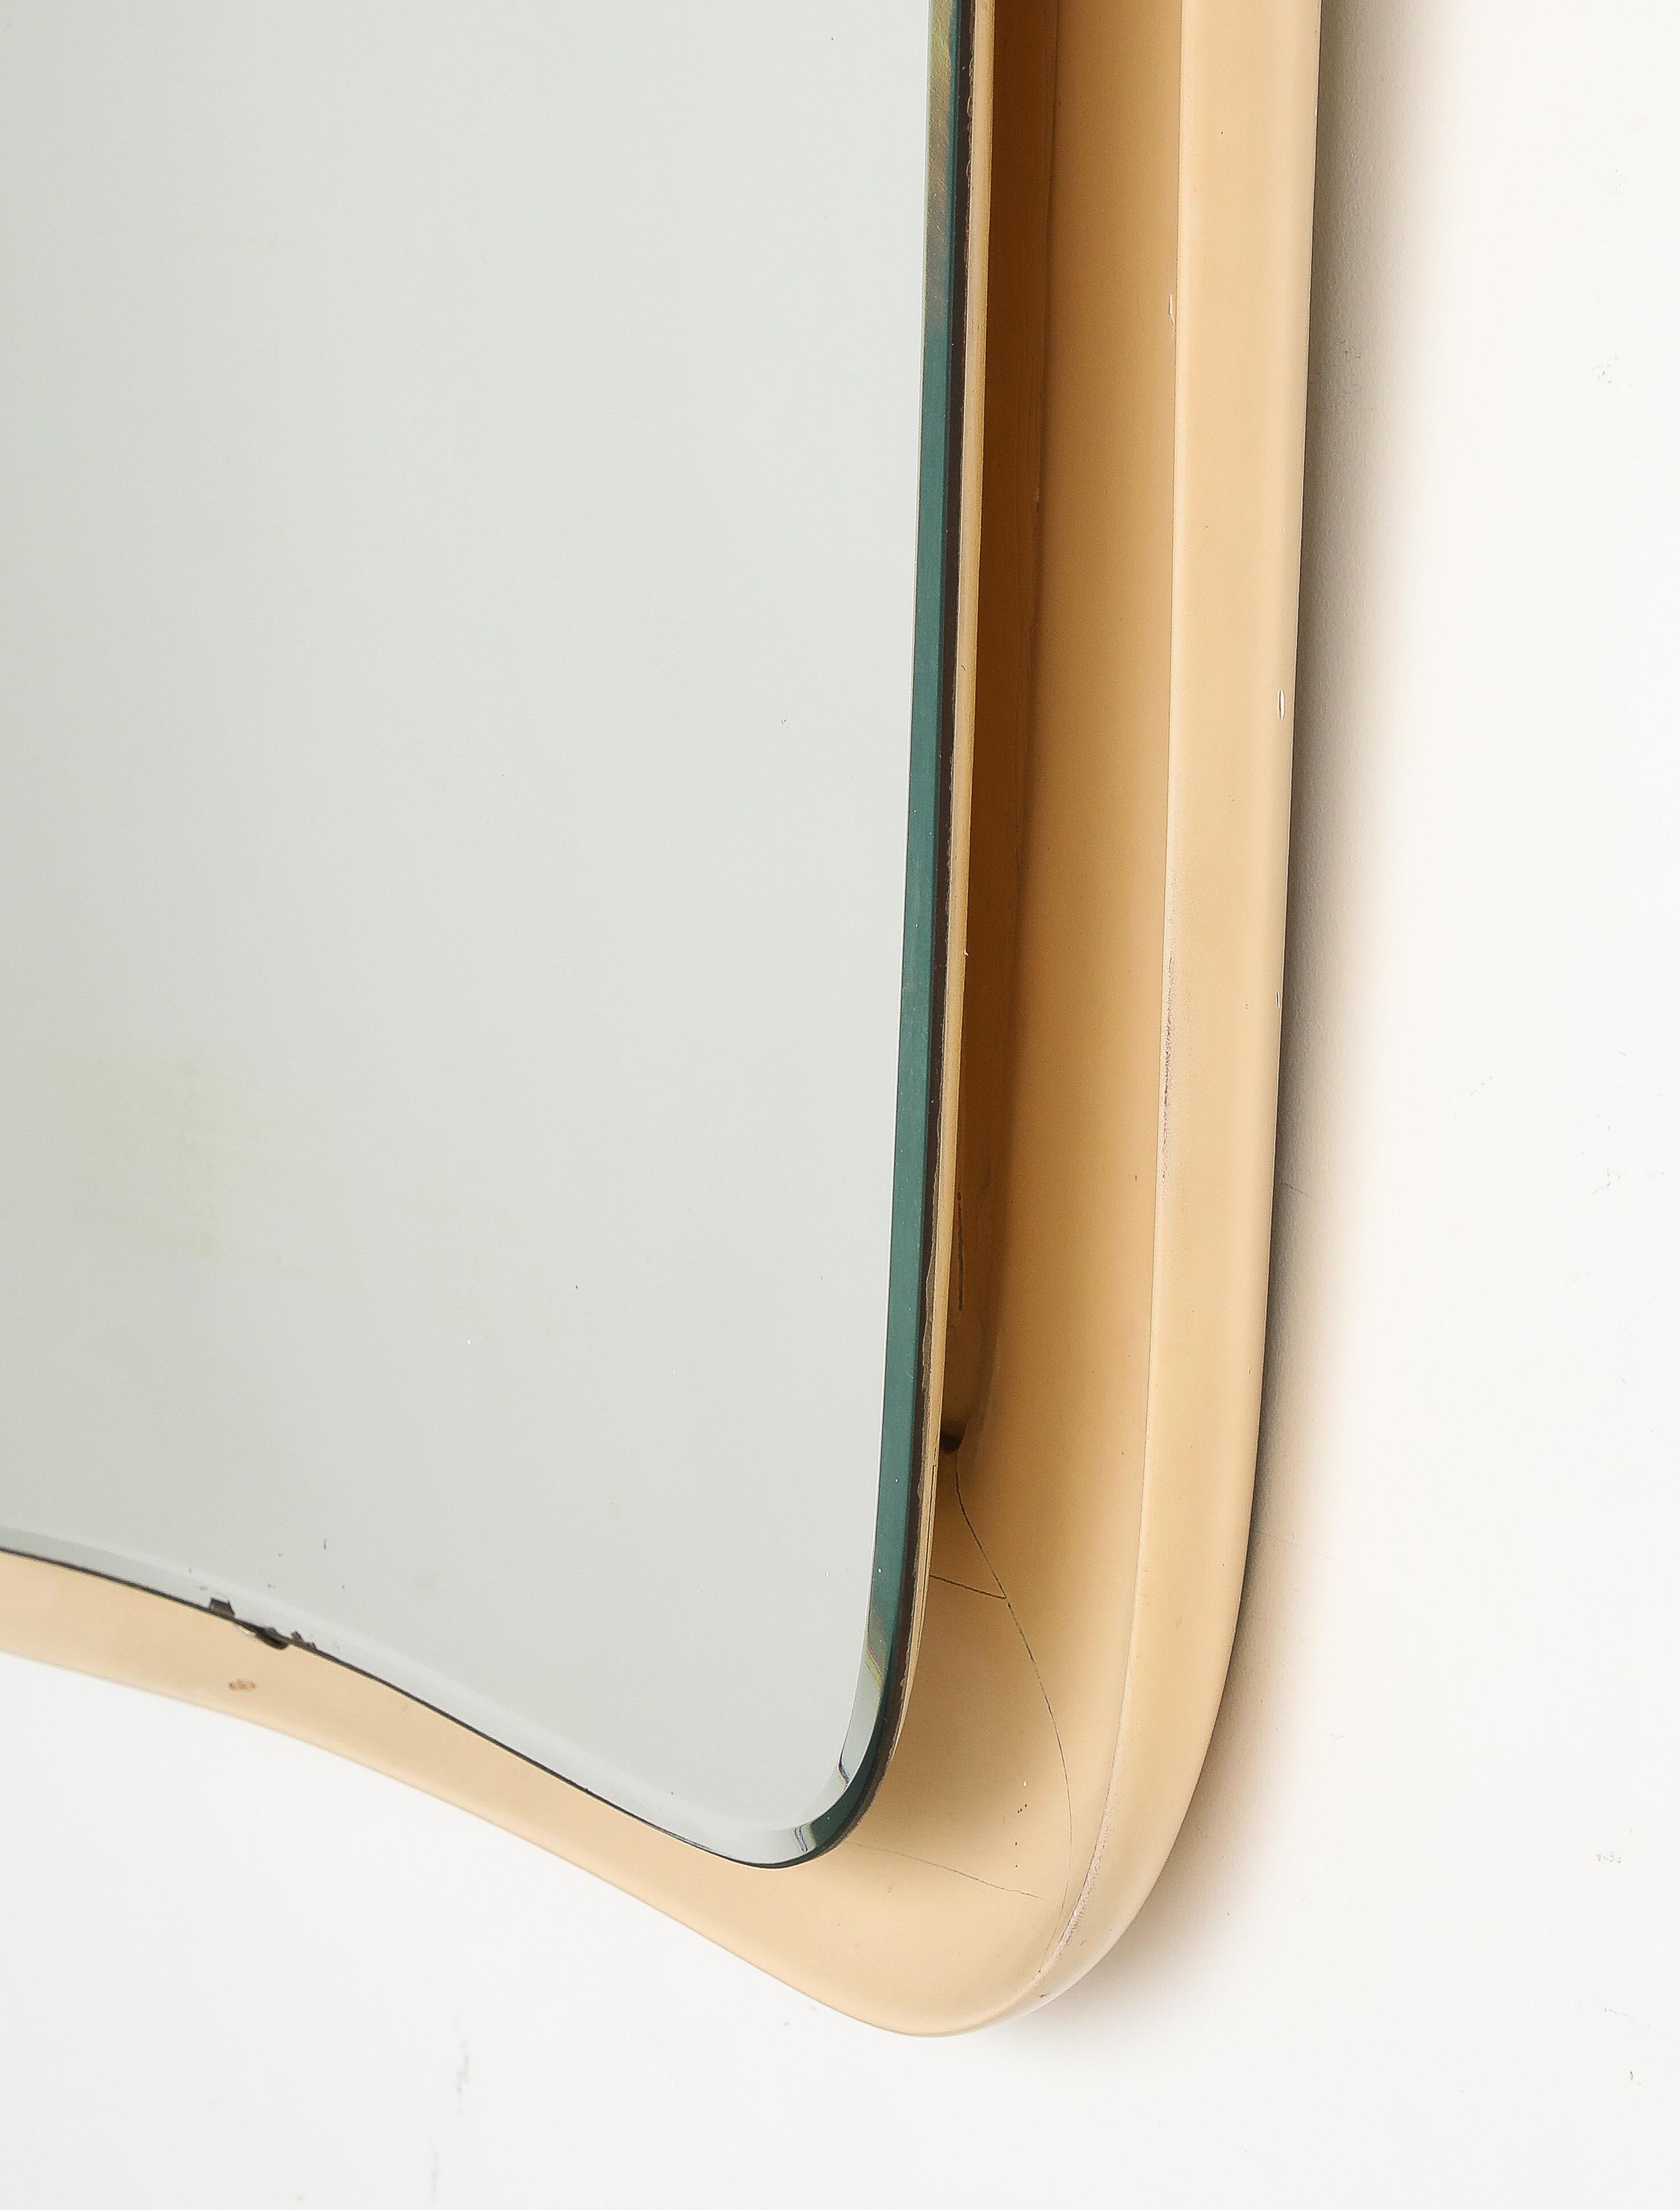 Italian Modernist Lacquered Floating Wall Mirror, Italy, circa 1960  For Sale 2